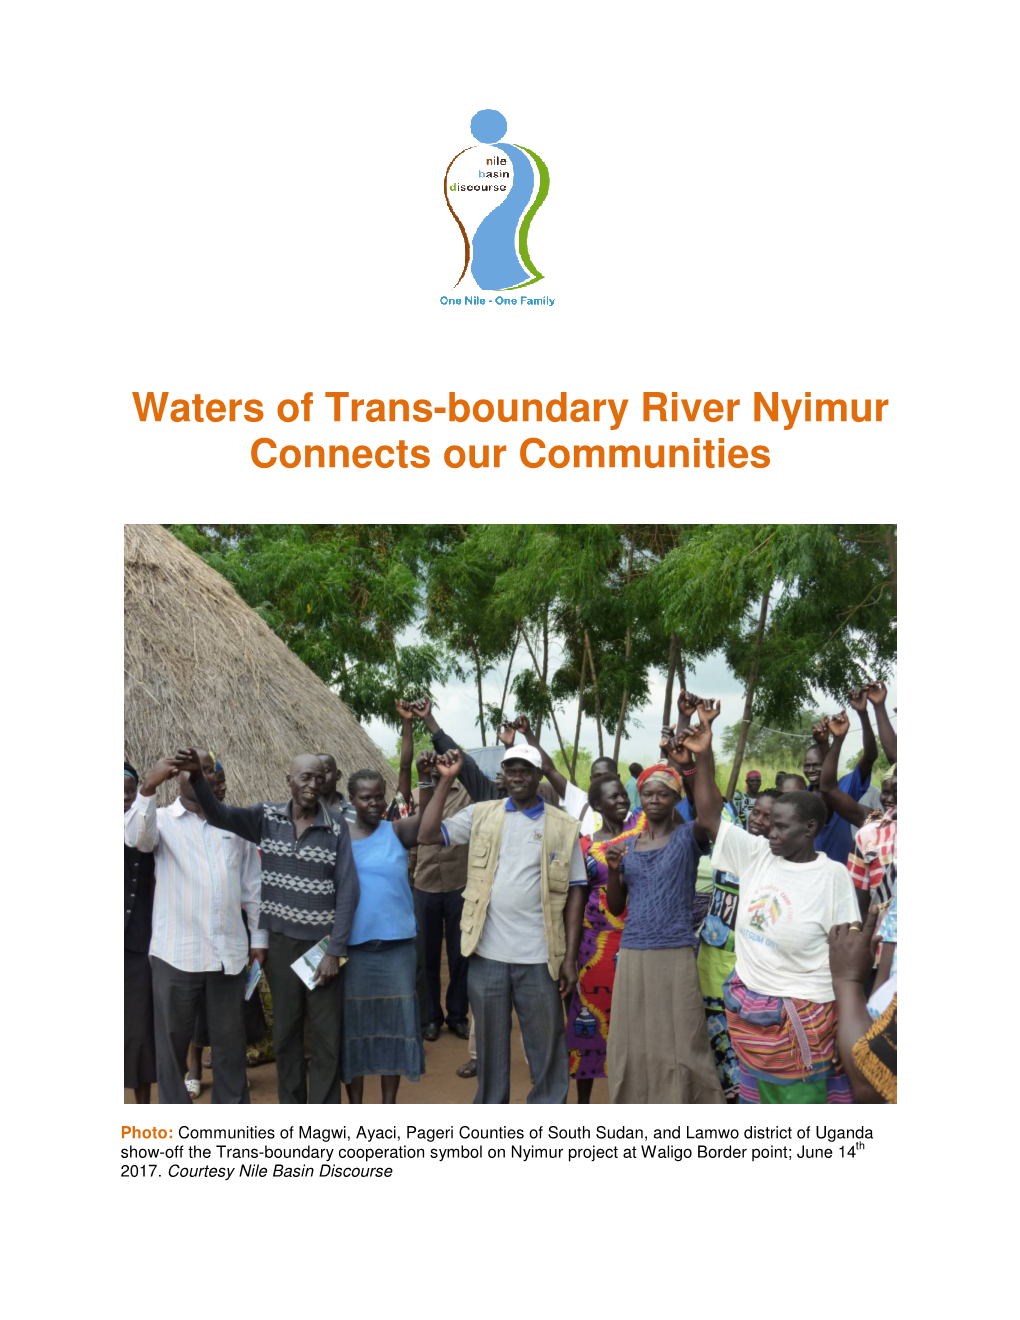 Waters of Trans-Boundary River Nyimur Connects Our Communities